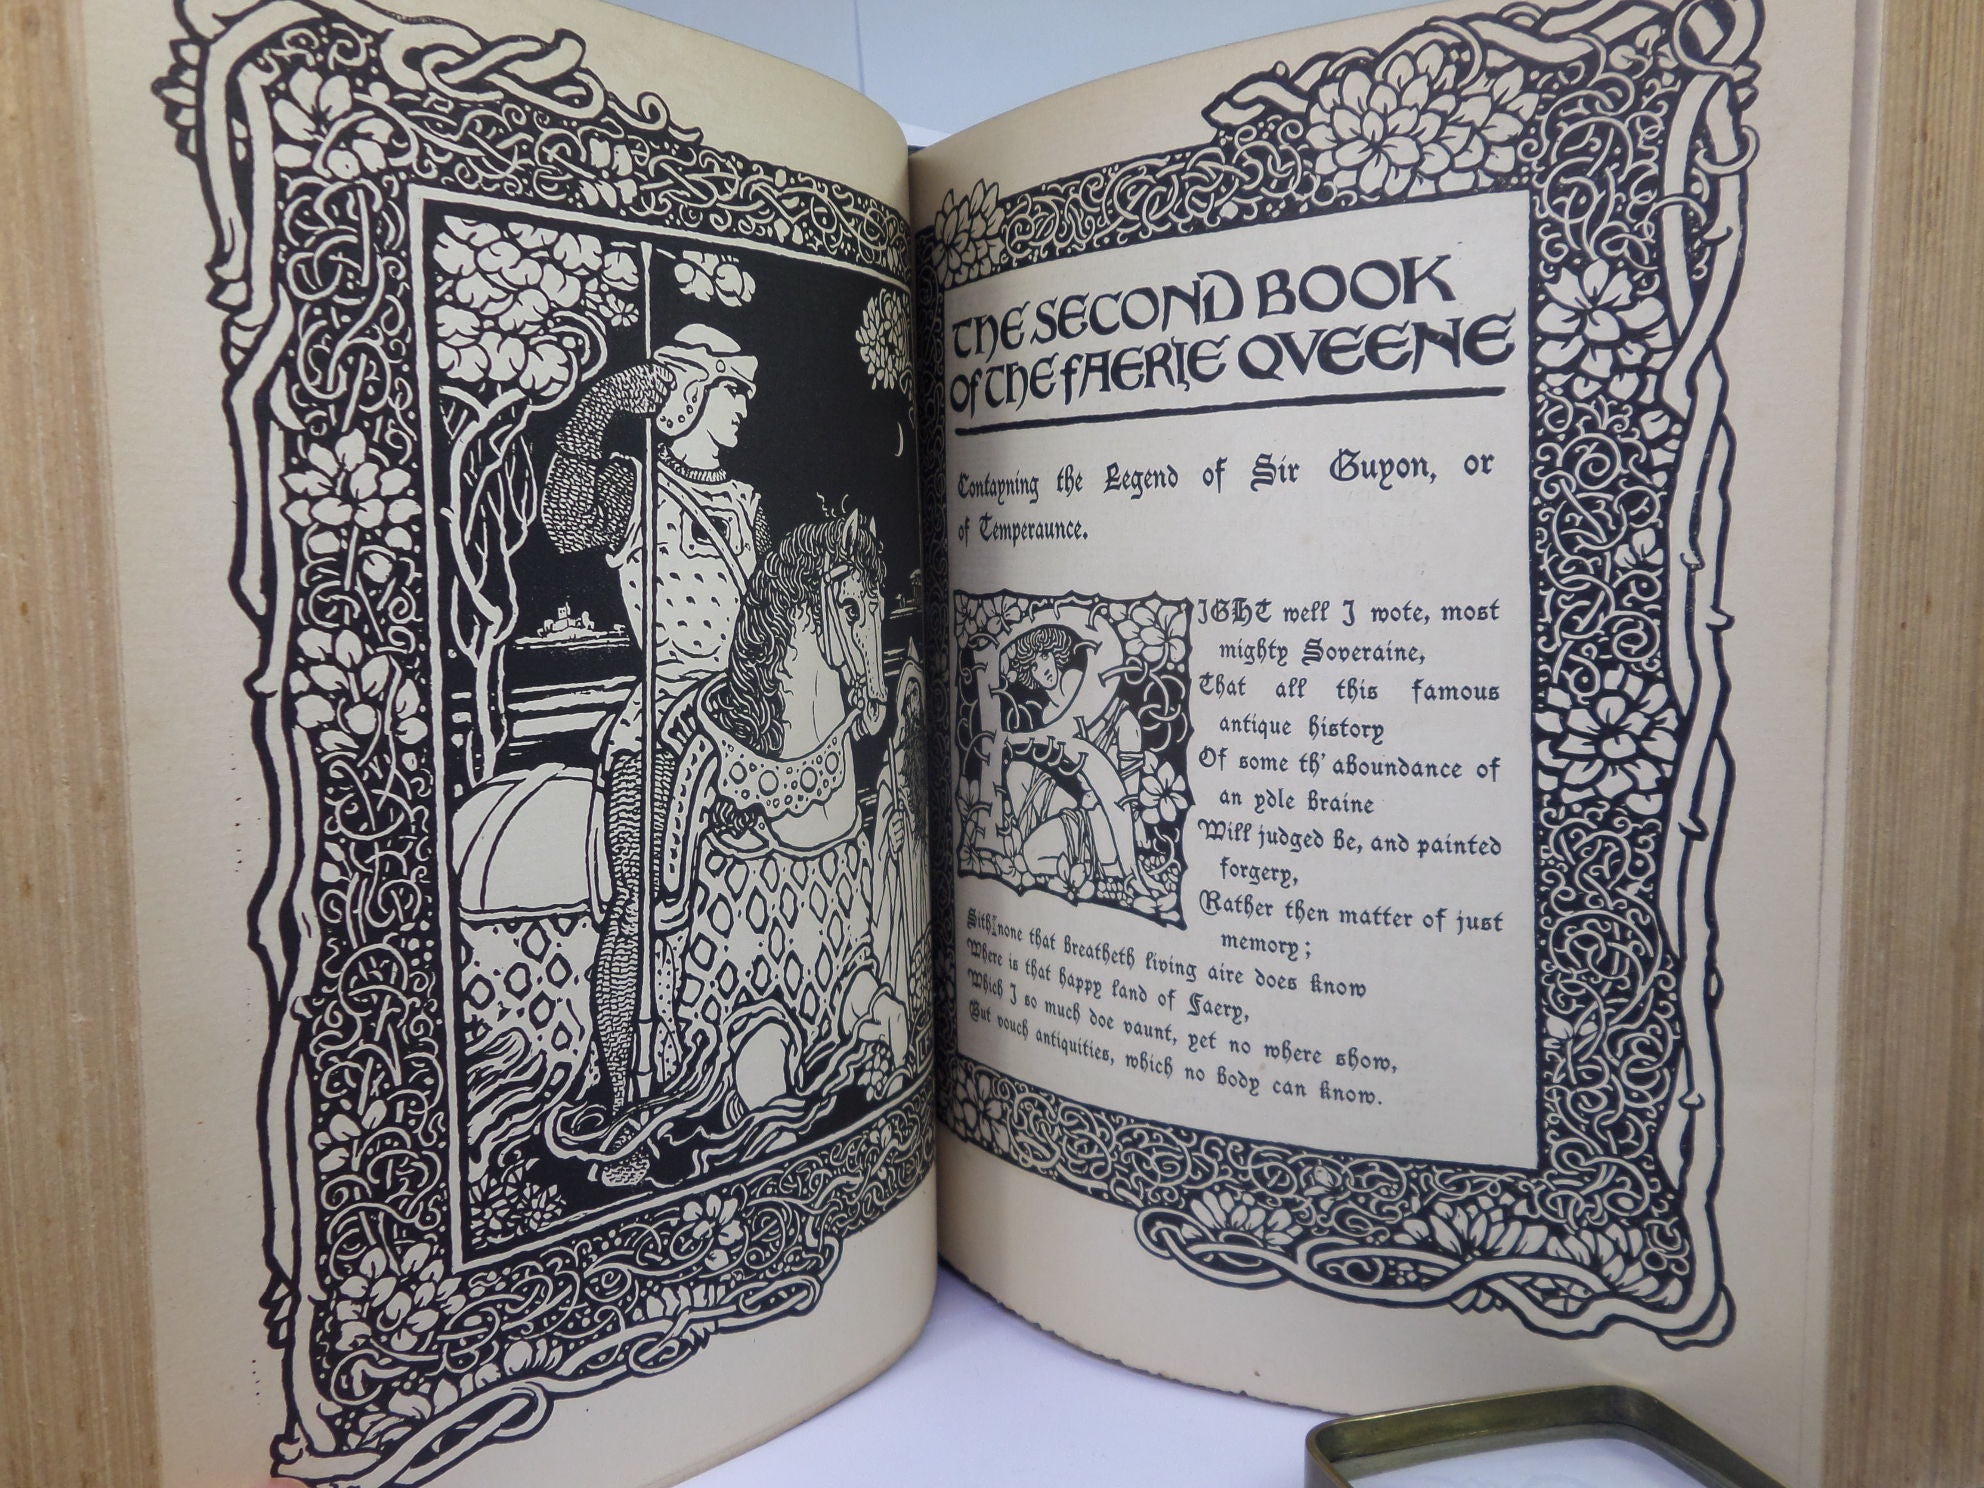 THE FAERIE QUEENE BY EDMUND SPENSER 1897 ILLUSTRATED BY LOVIS FAIRFAX-MUCKLEY, LIMITED EDITION IN TWO VOLS